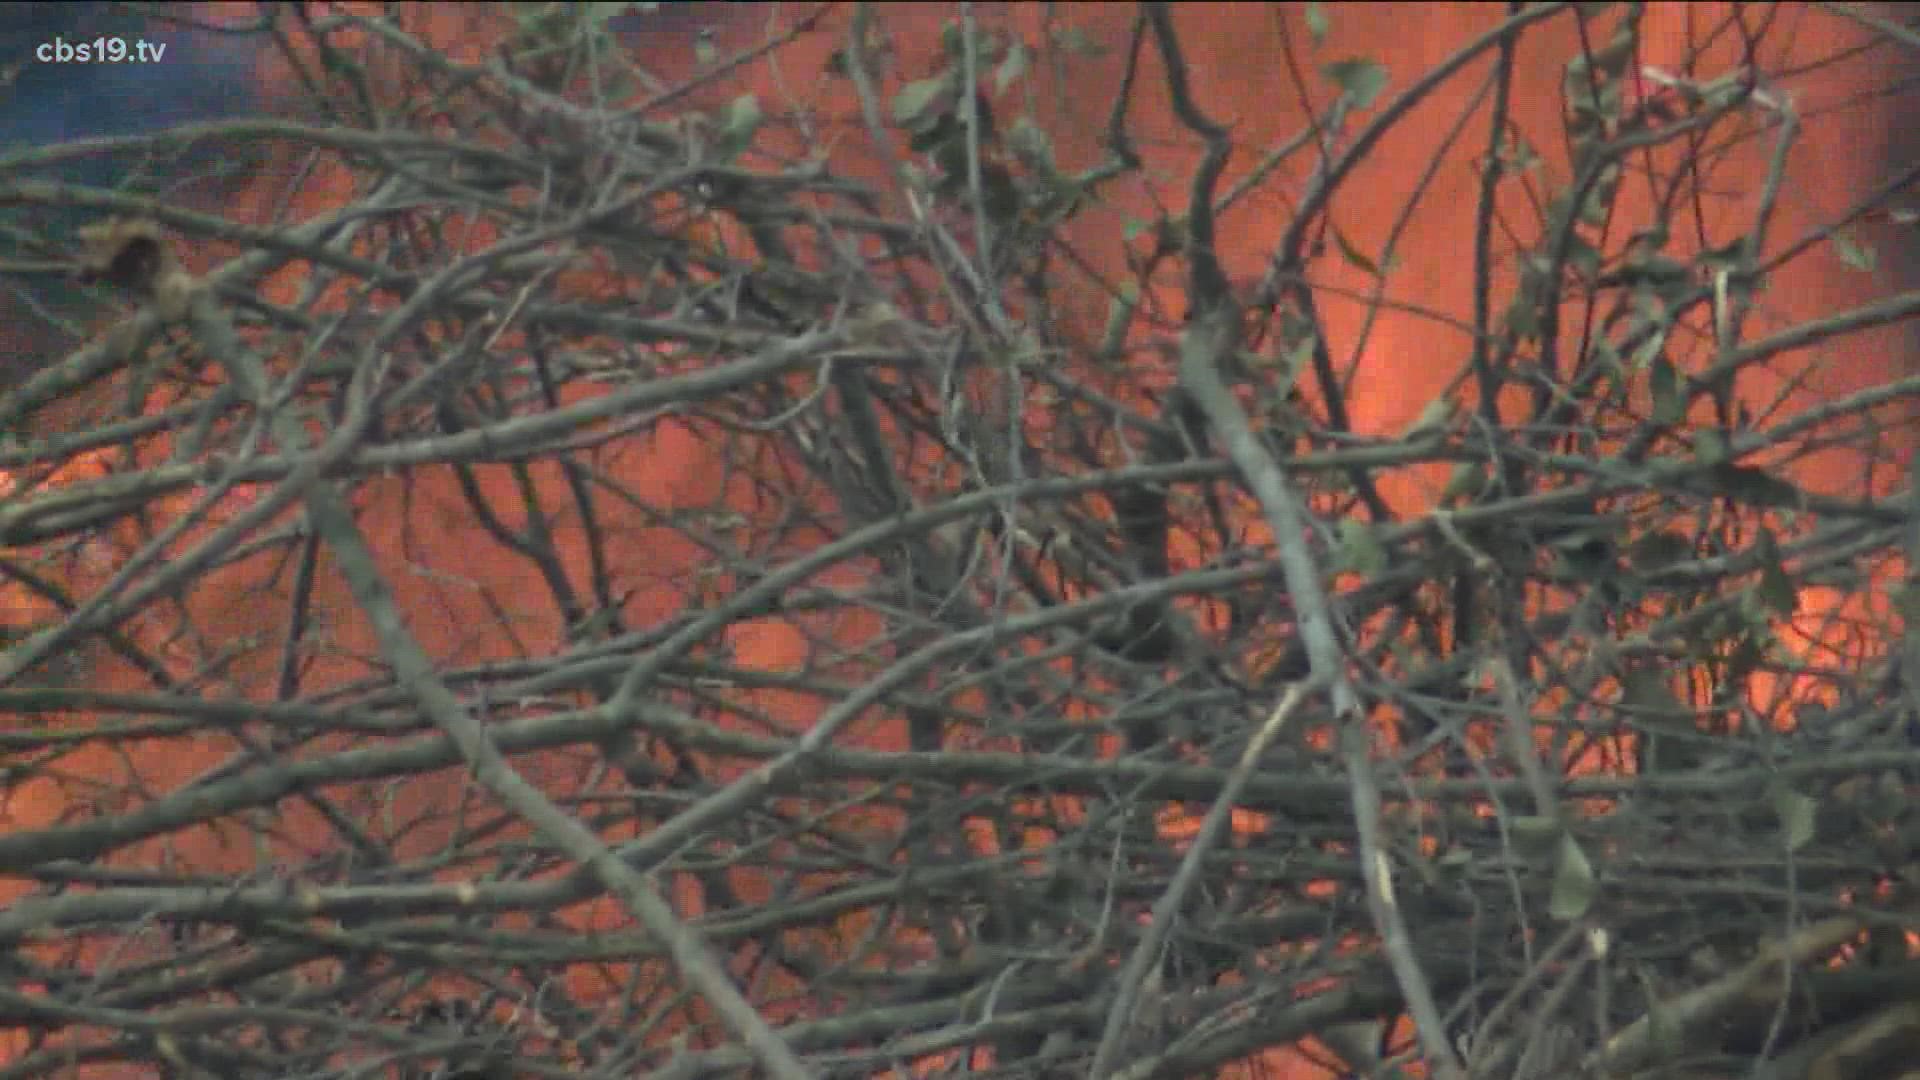 Wild fire danger remains significant despite recent rain, storms in East Texas